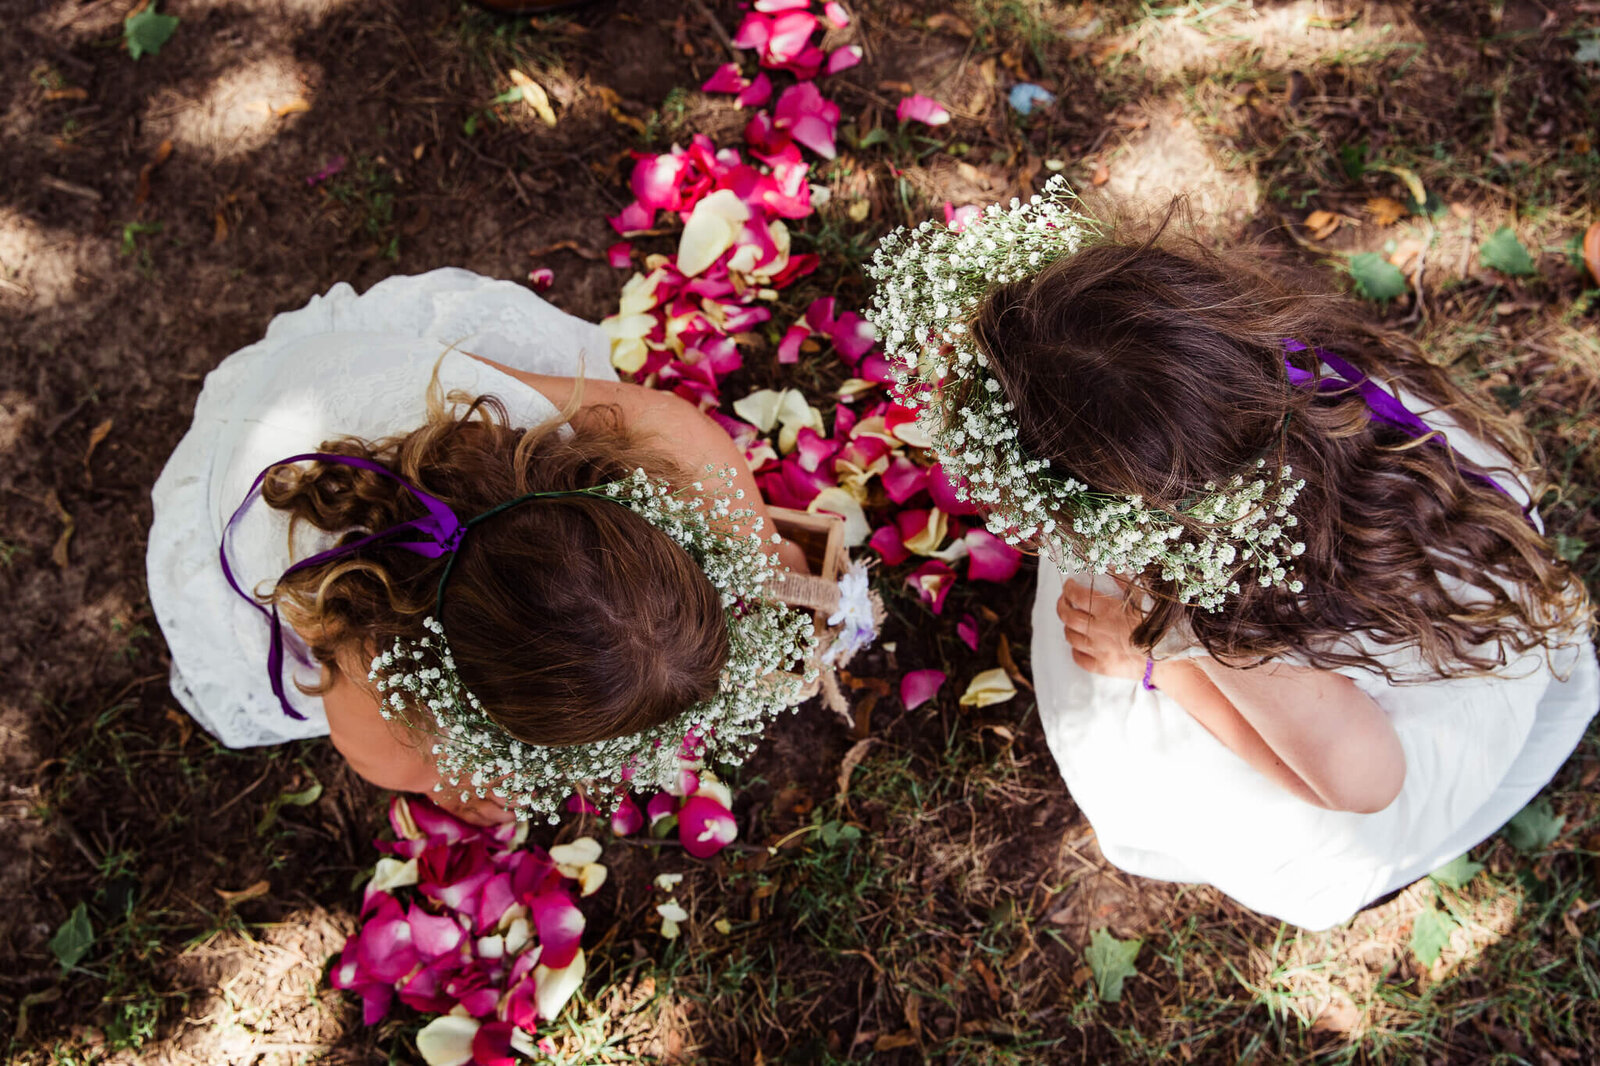 Two flower girls wearing floral crowns play with rose petals at Fanshawe Pioneer Village